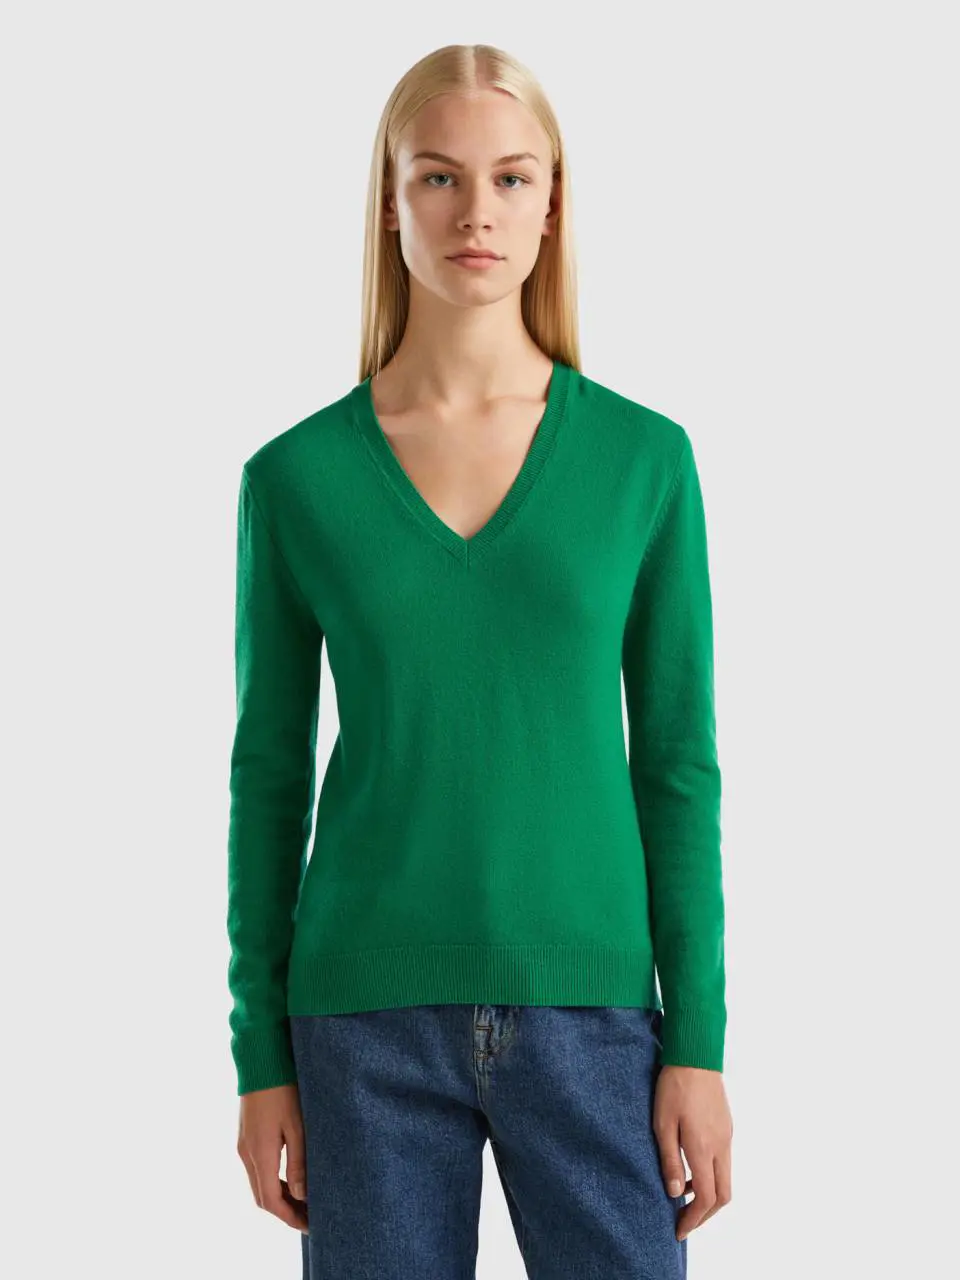 Benetton forest green v-neck sweater in pure merino wool. 1